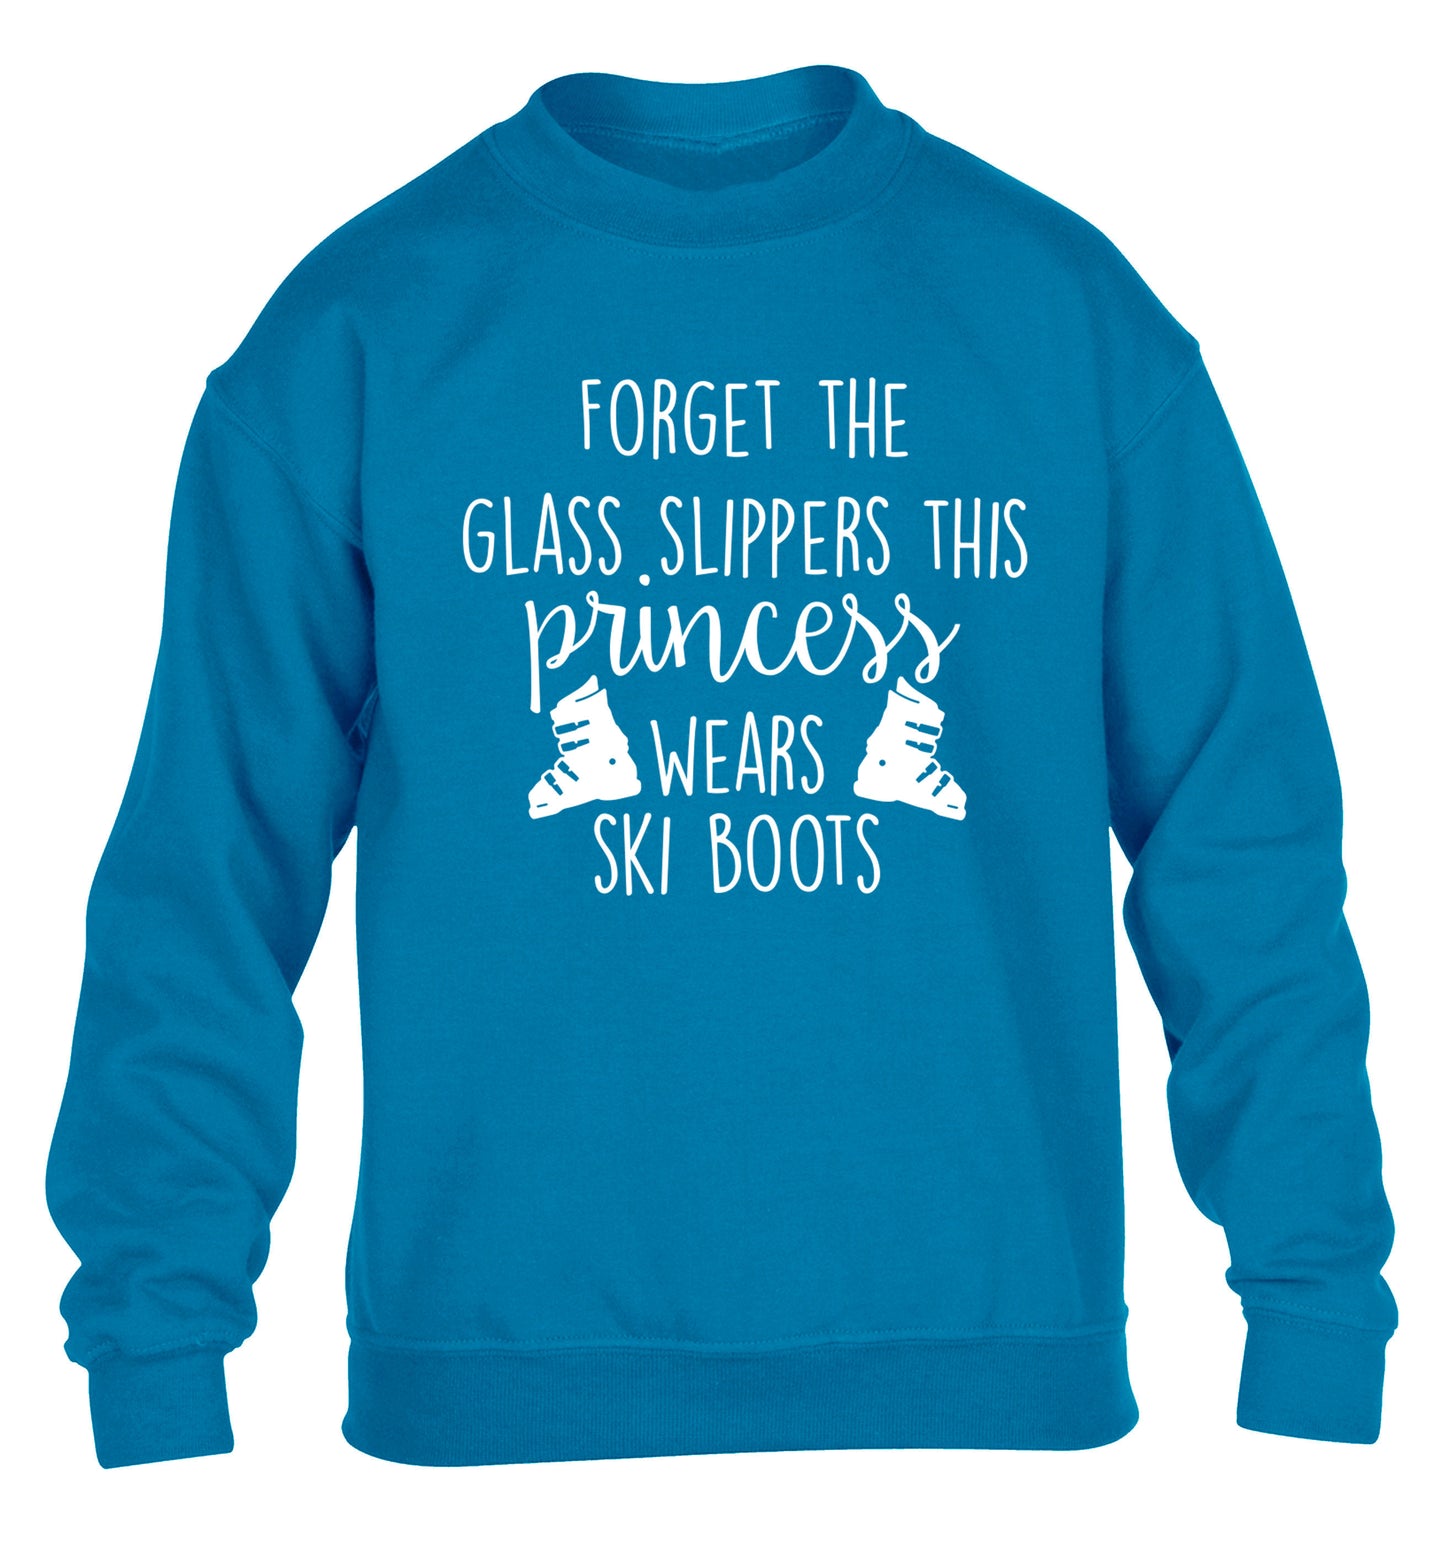 Forget the glass slippers this princess wears ski boots children's blue sweater 12-14 Years